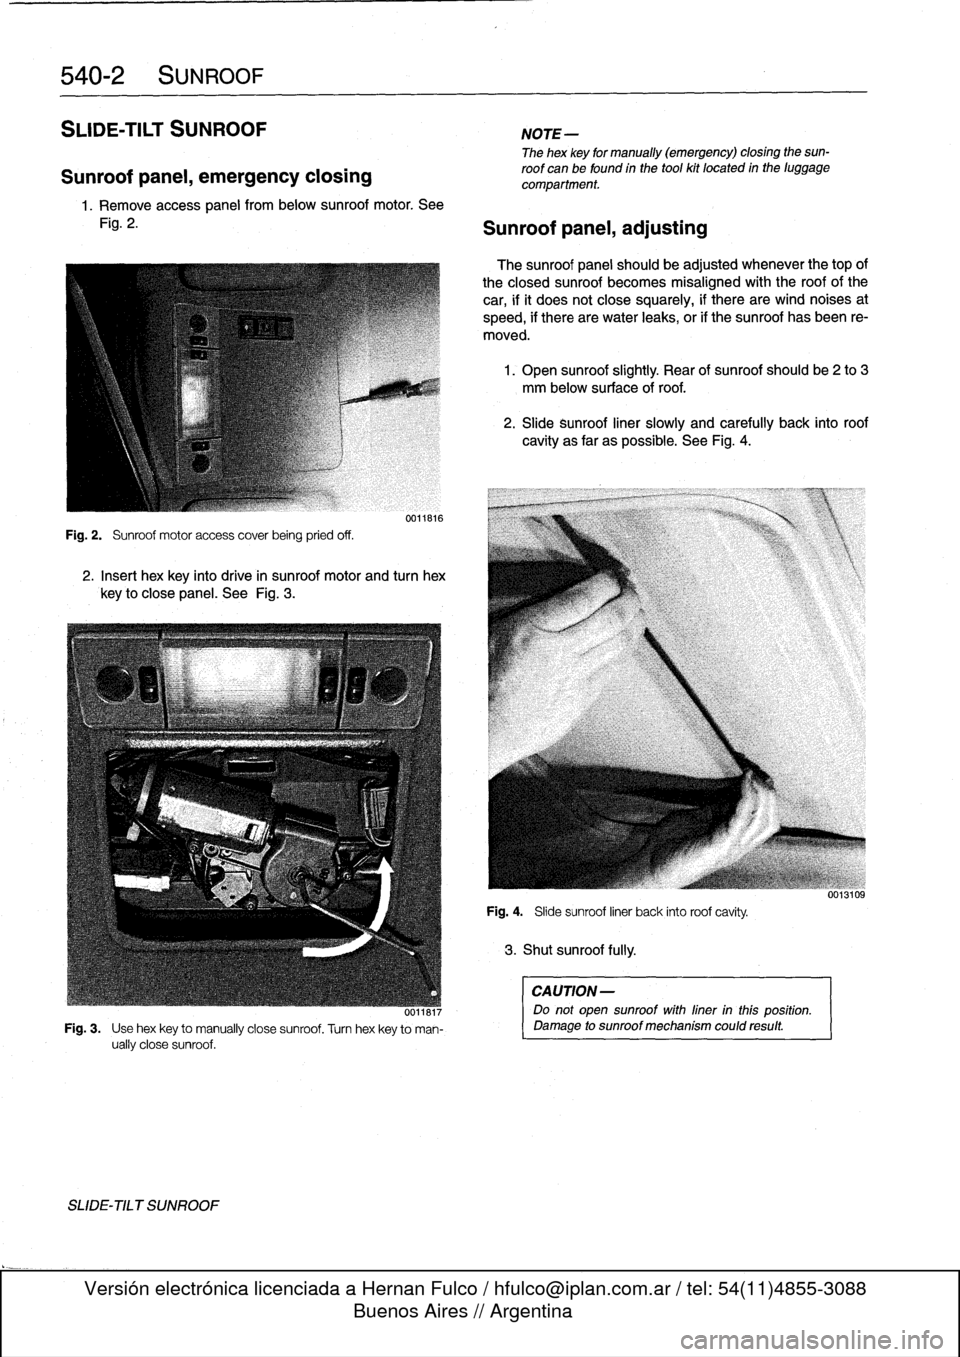 BMW M3 1998 E36 Workshop Manual 
540-2
SUNROOF

SLIDE-TILT
SUNROOF

Sunroof
panel,
emergency
closing

1.
Remove
access
panel
frombelow
sunroof
motor
.
See

Fig
.
2
.

Fig
.
2
.

	

Sunroof
motor
access
coverbeing
pried
off
.

001181